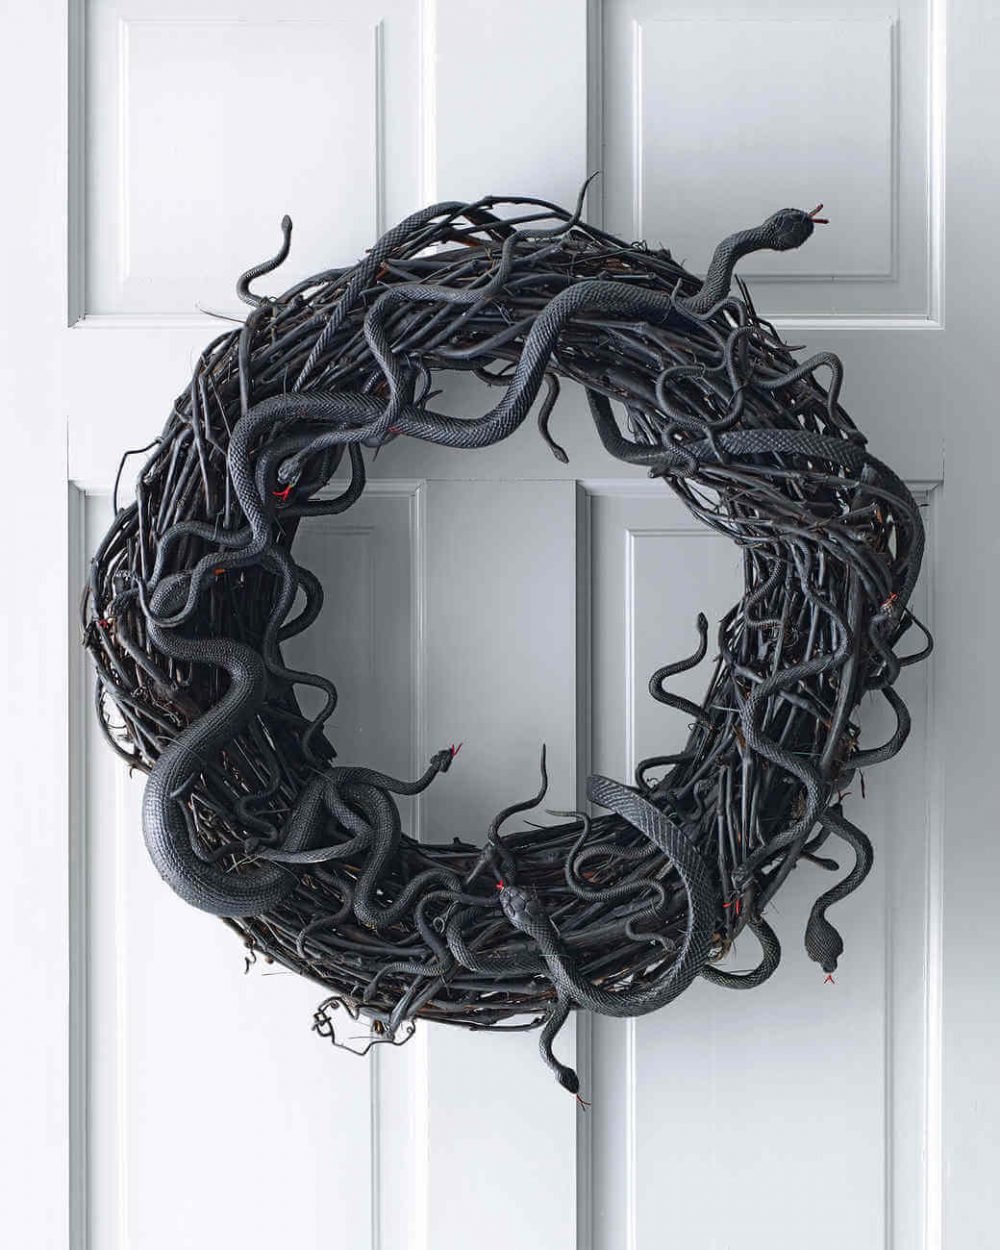 A wreath with a snake on it hanging on a door
